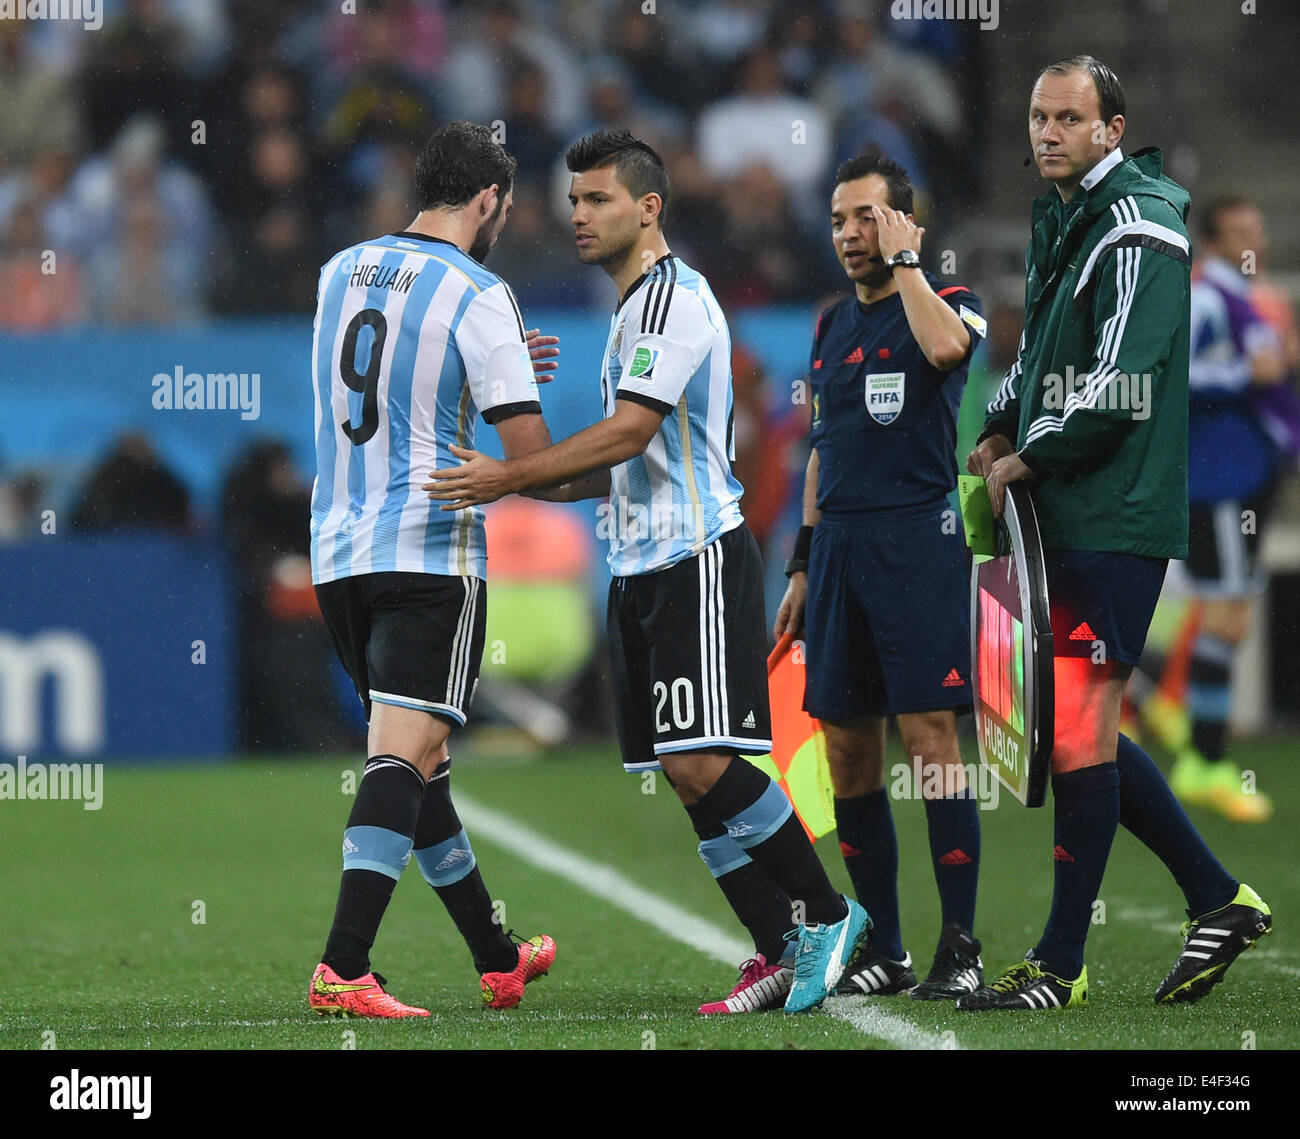 Sao Paulo, Brazil. 09th July, 2014. Gonzalo Higuain (L) of Argentina is substituted for Sergio Aguero (2-L) during the FIFA World Cup 2014 semi-final soccer match between the Netherlands and Argentina at the Arena Corinthians in Sao Paulo, Brazil, 09 July 2014. Photo: Marius Becker/dpa/Alamy Live News Stock Photo